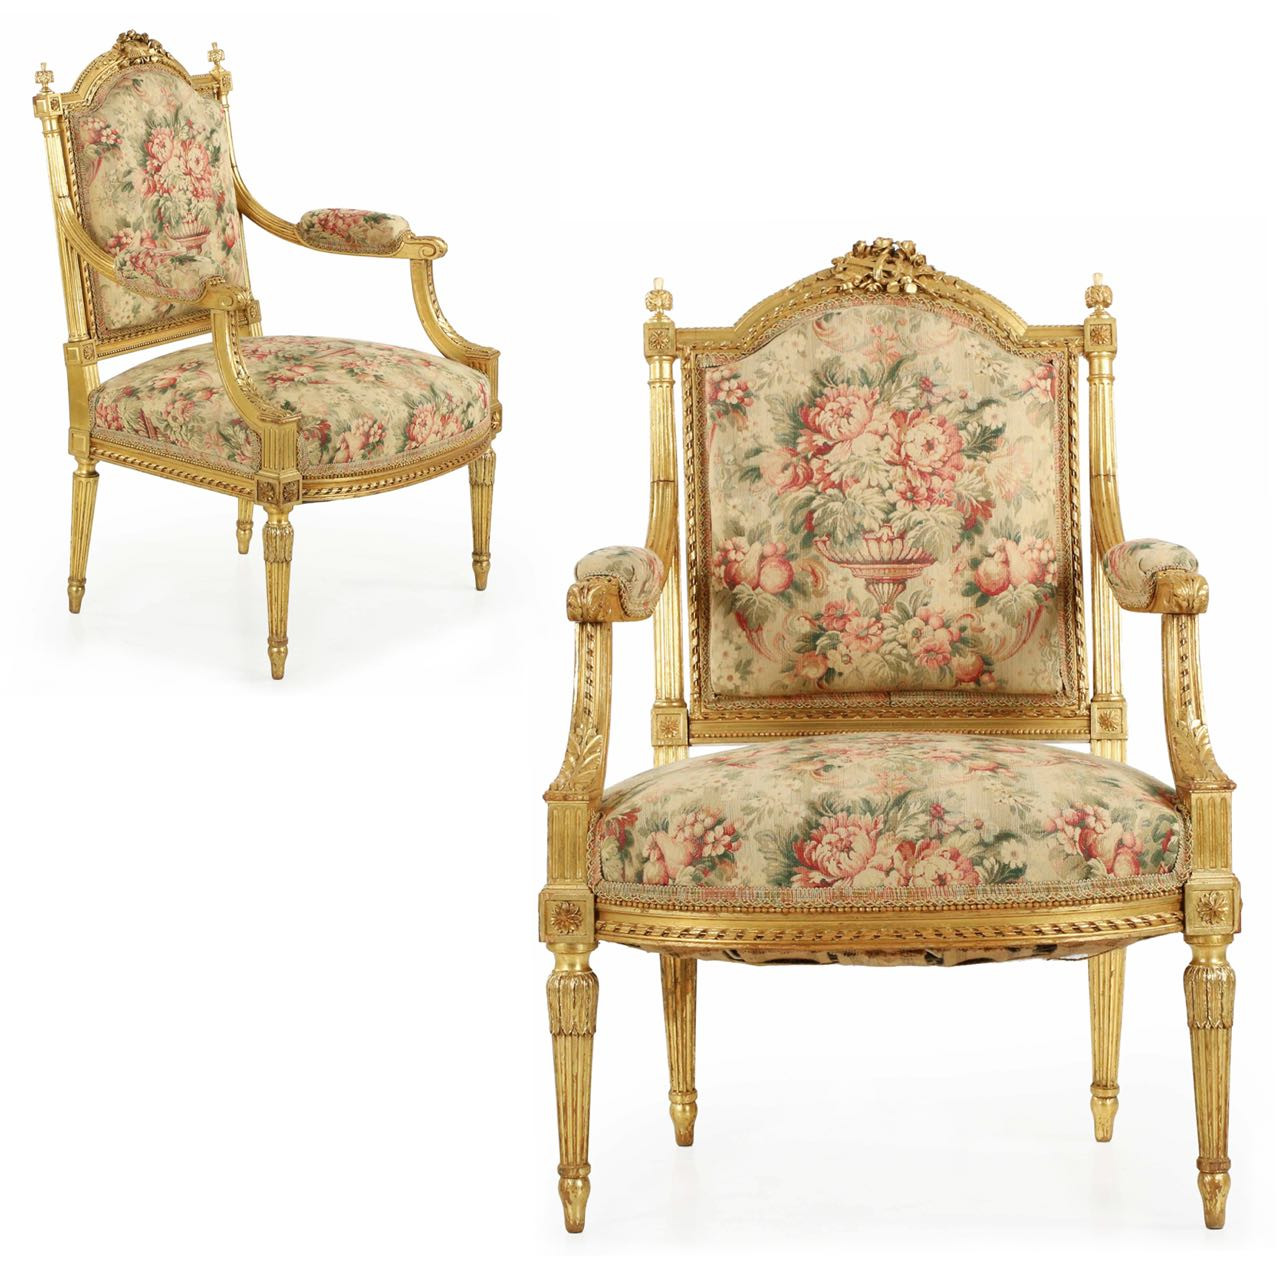 Fine Pair of French Louis XVI Style Giltwood Arm Chairs